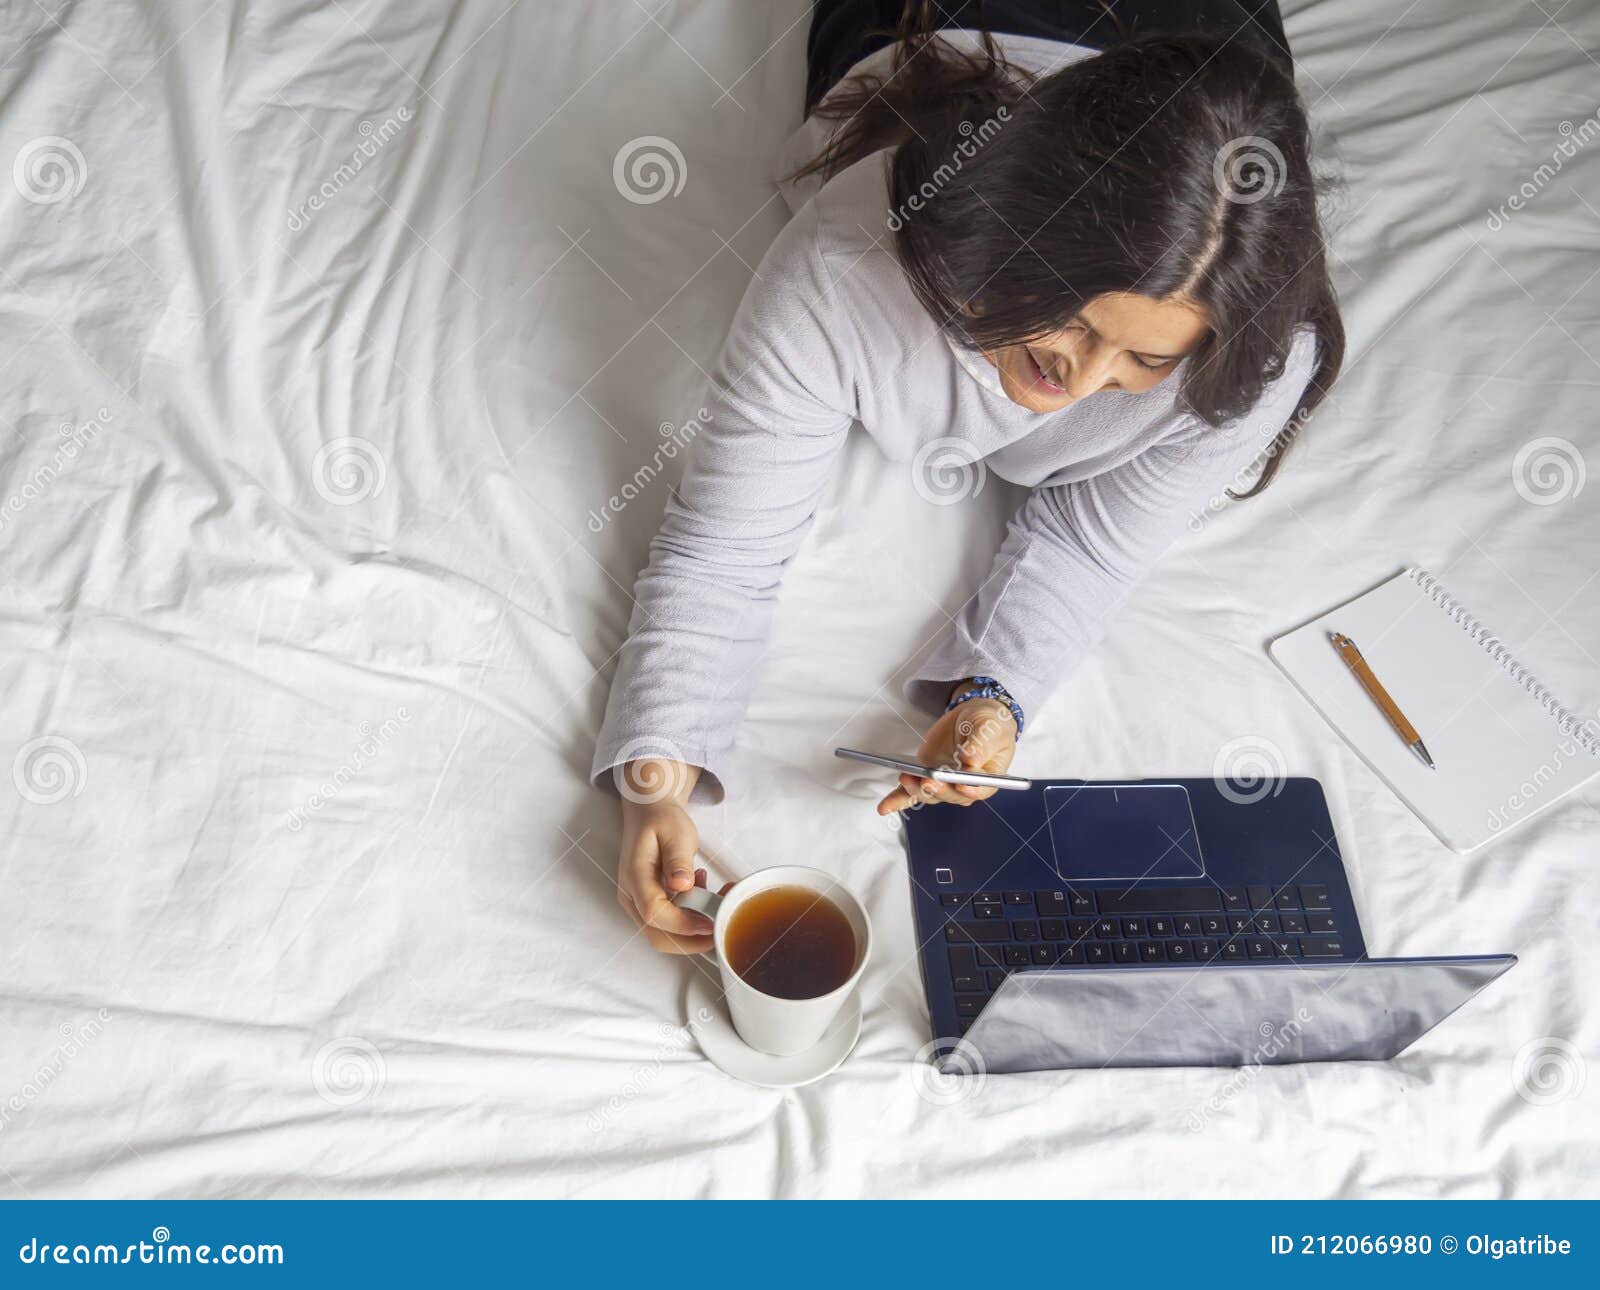 woman taking a call in pijama in bed drinking coffee in the morning.